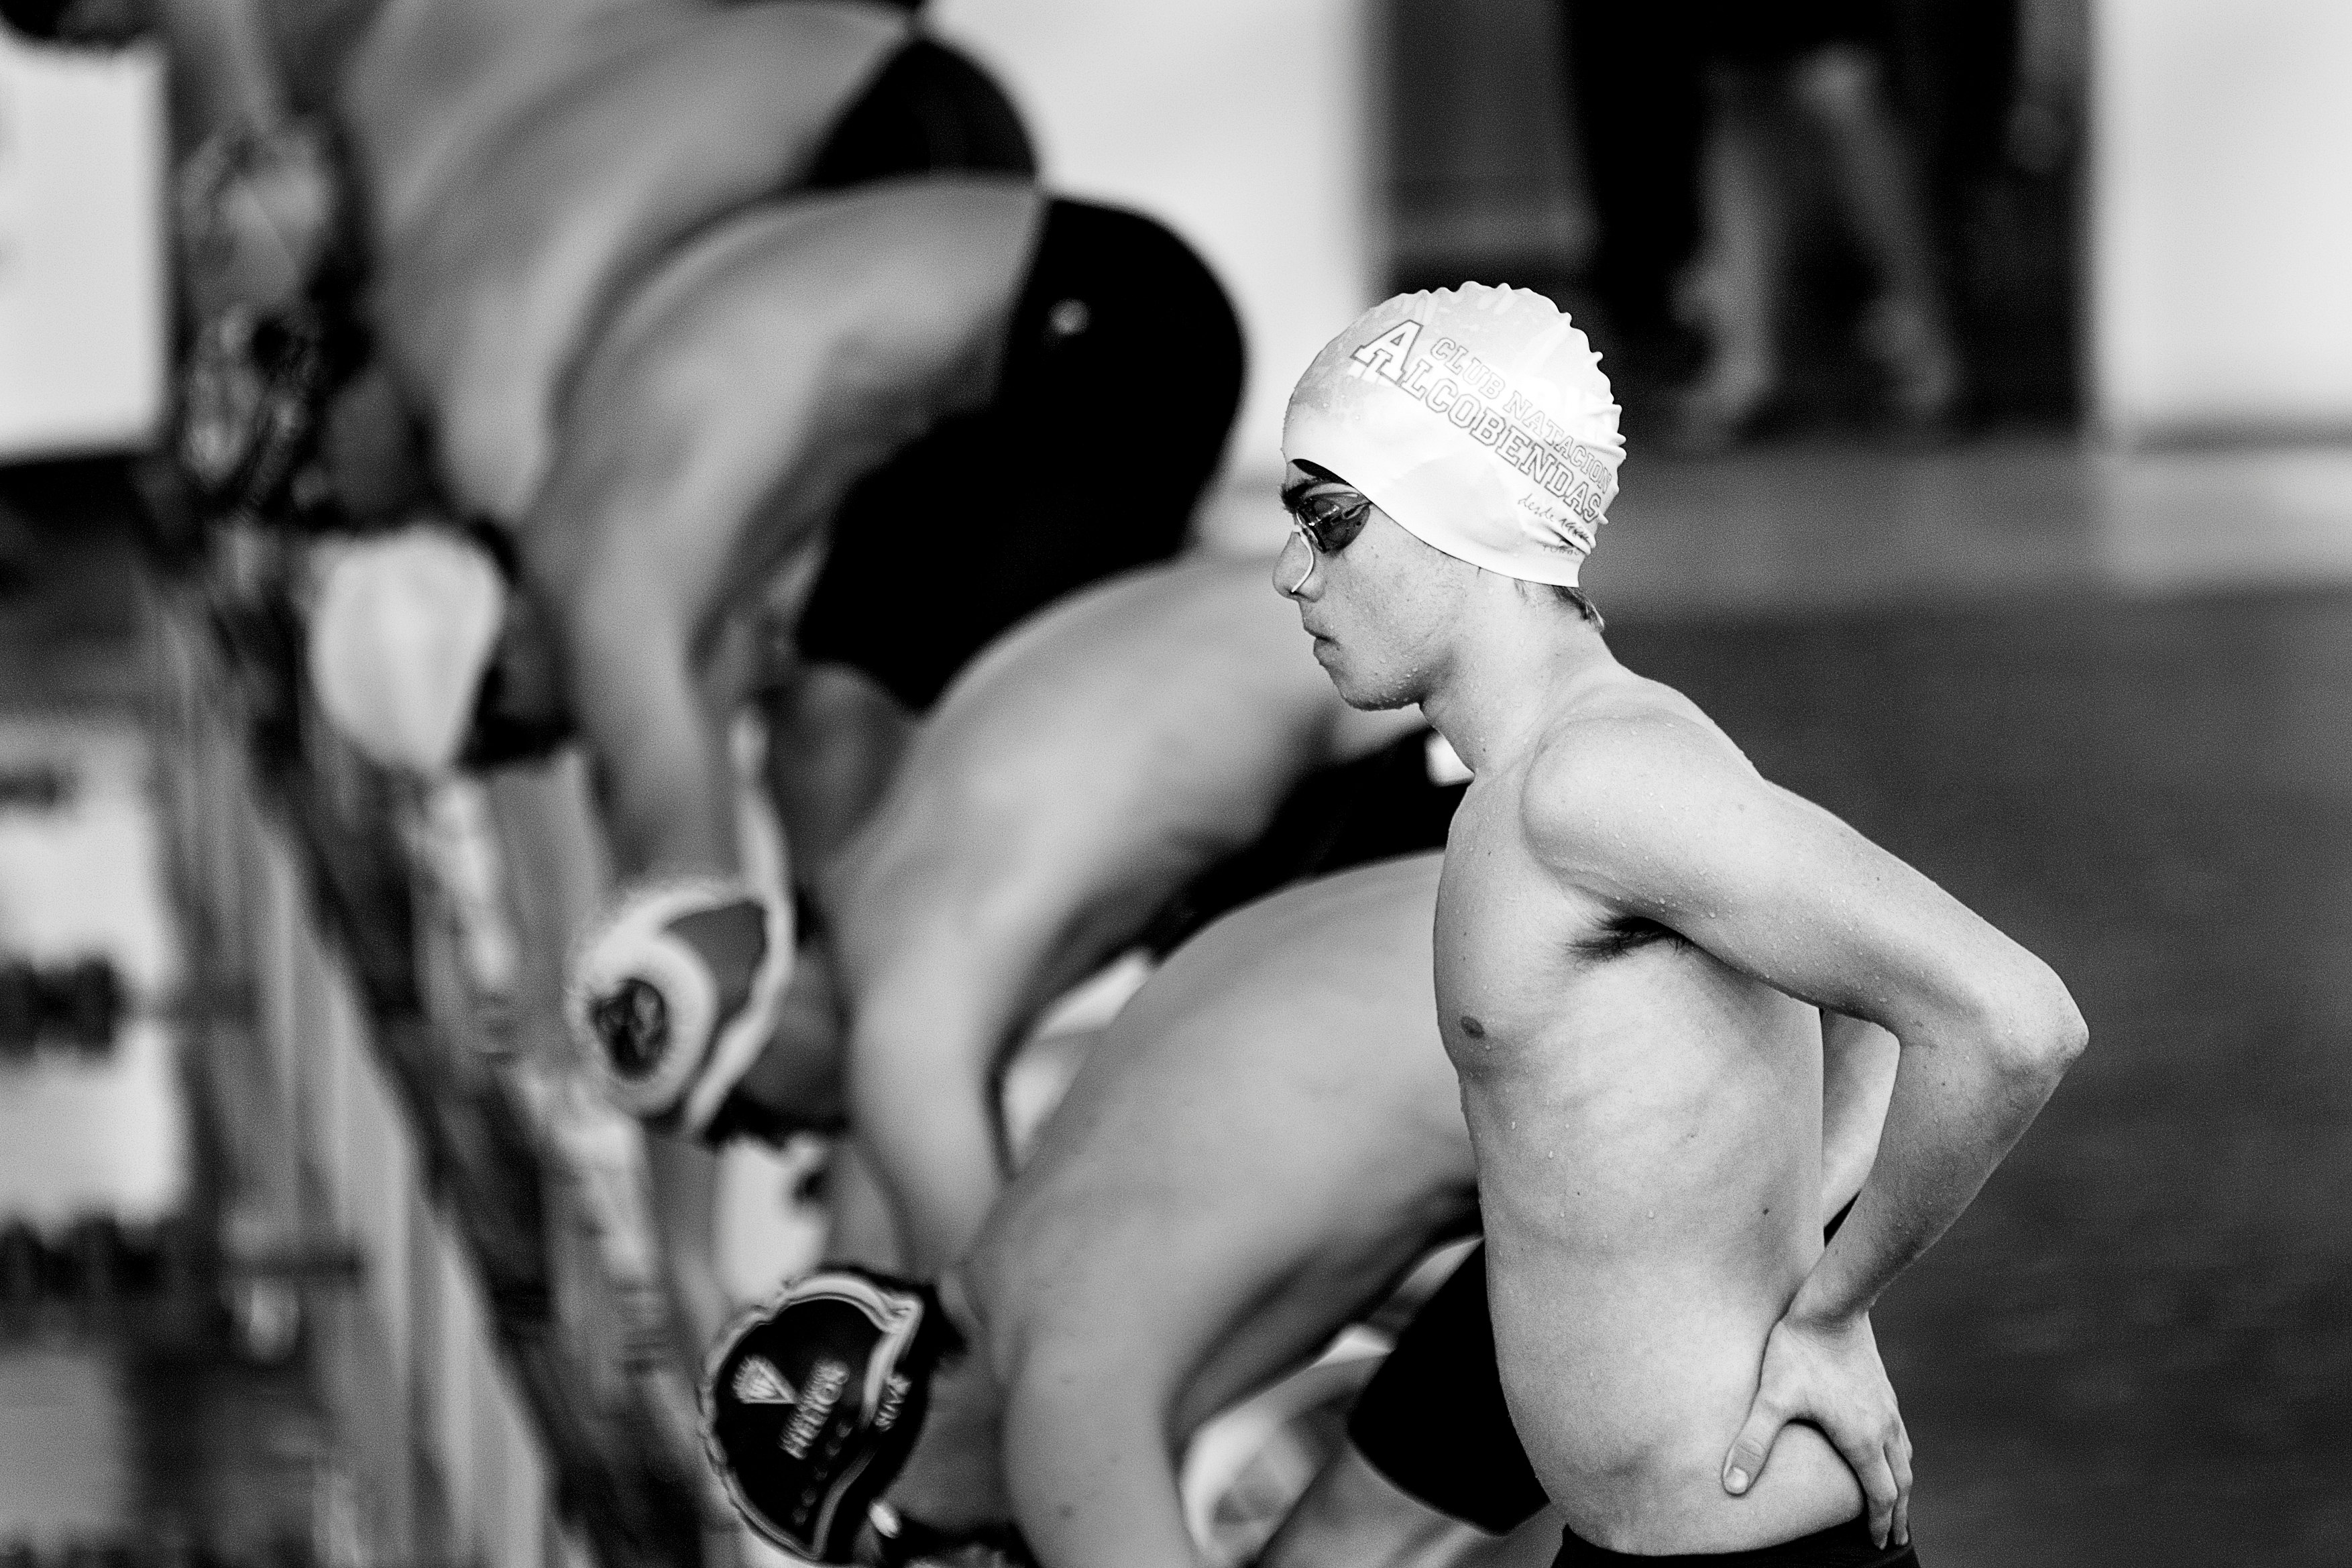 Swimmer in the starting blocks about to race.